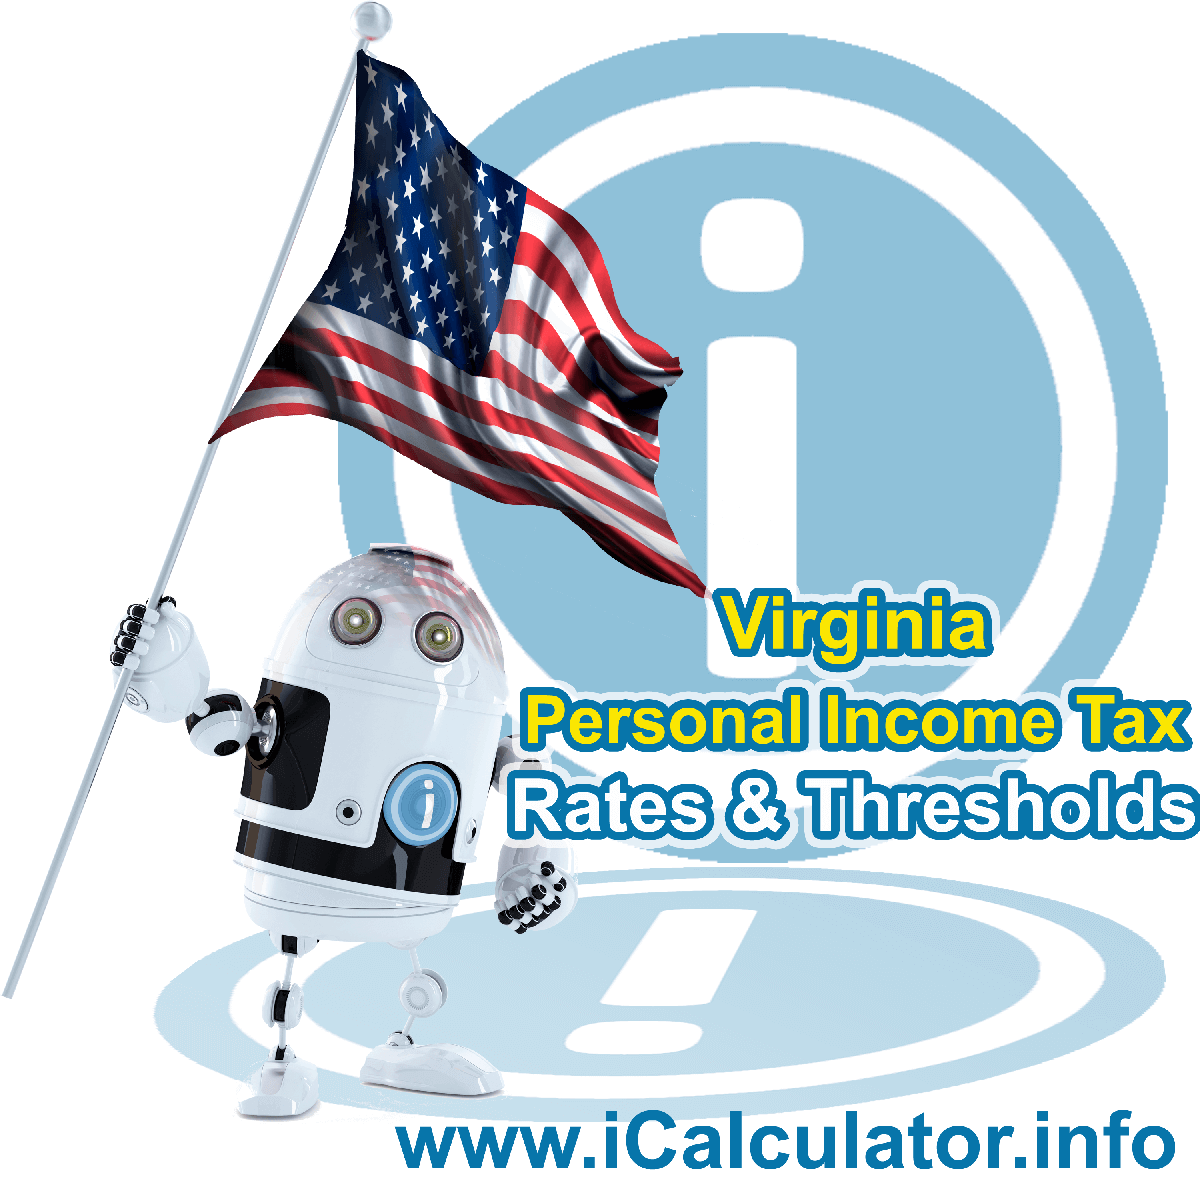 Virginia State Tax Tables 2018. This image displays details of the Virginia State Tax Tables for the 2018 tax return year which is provided in support of the 2018 US Tax Calculator